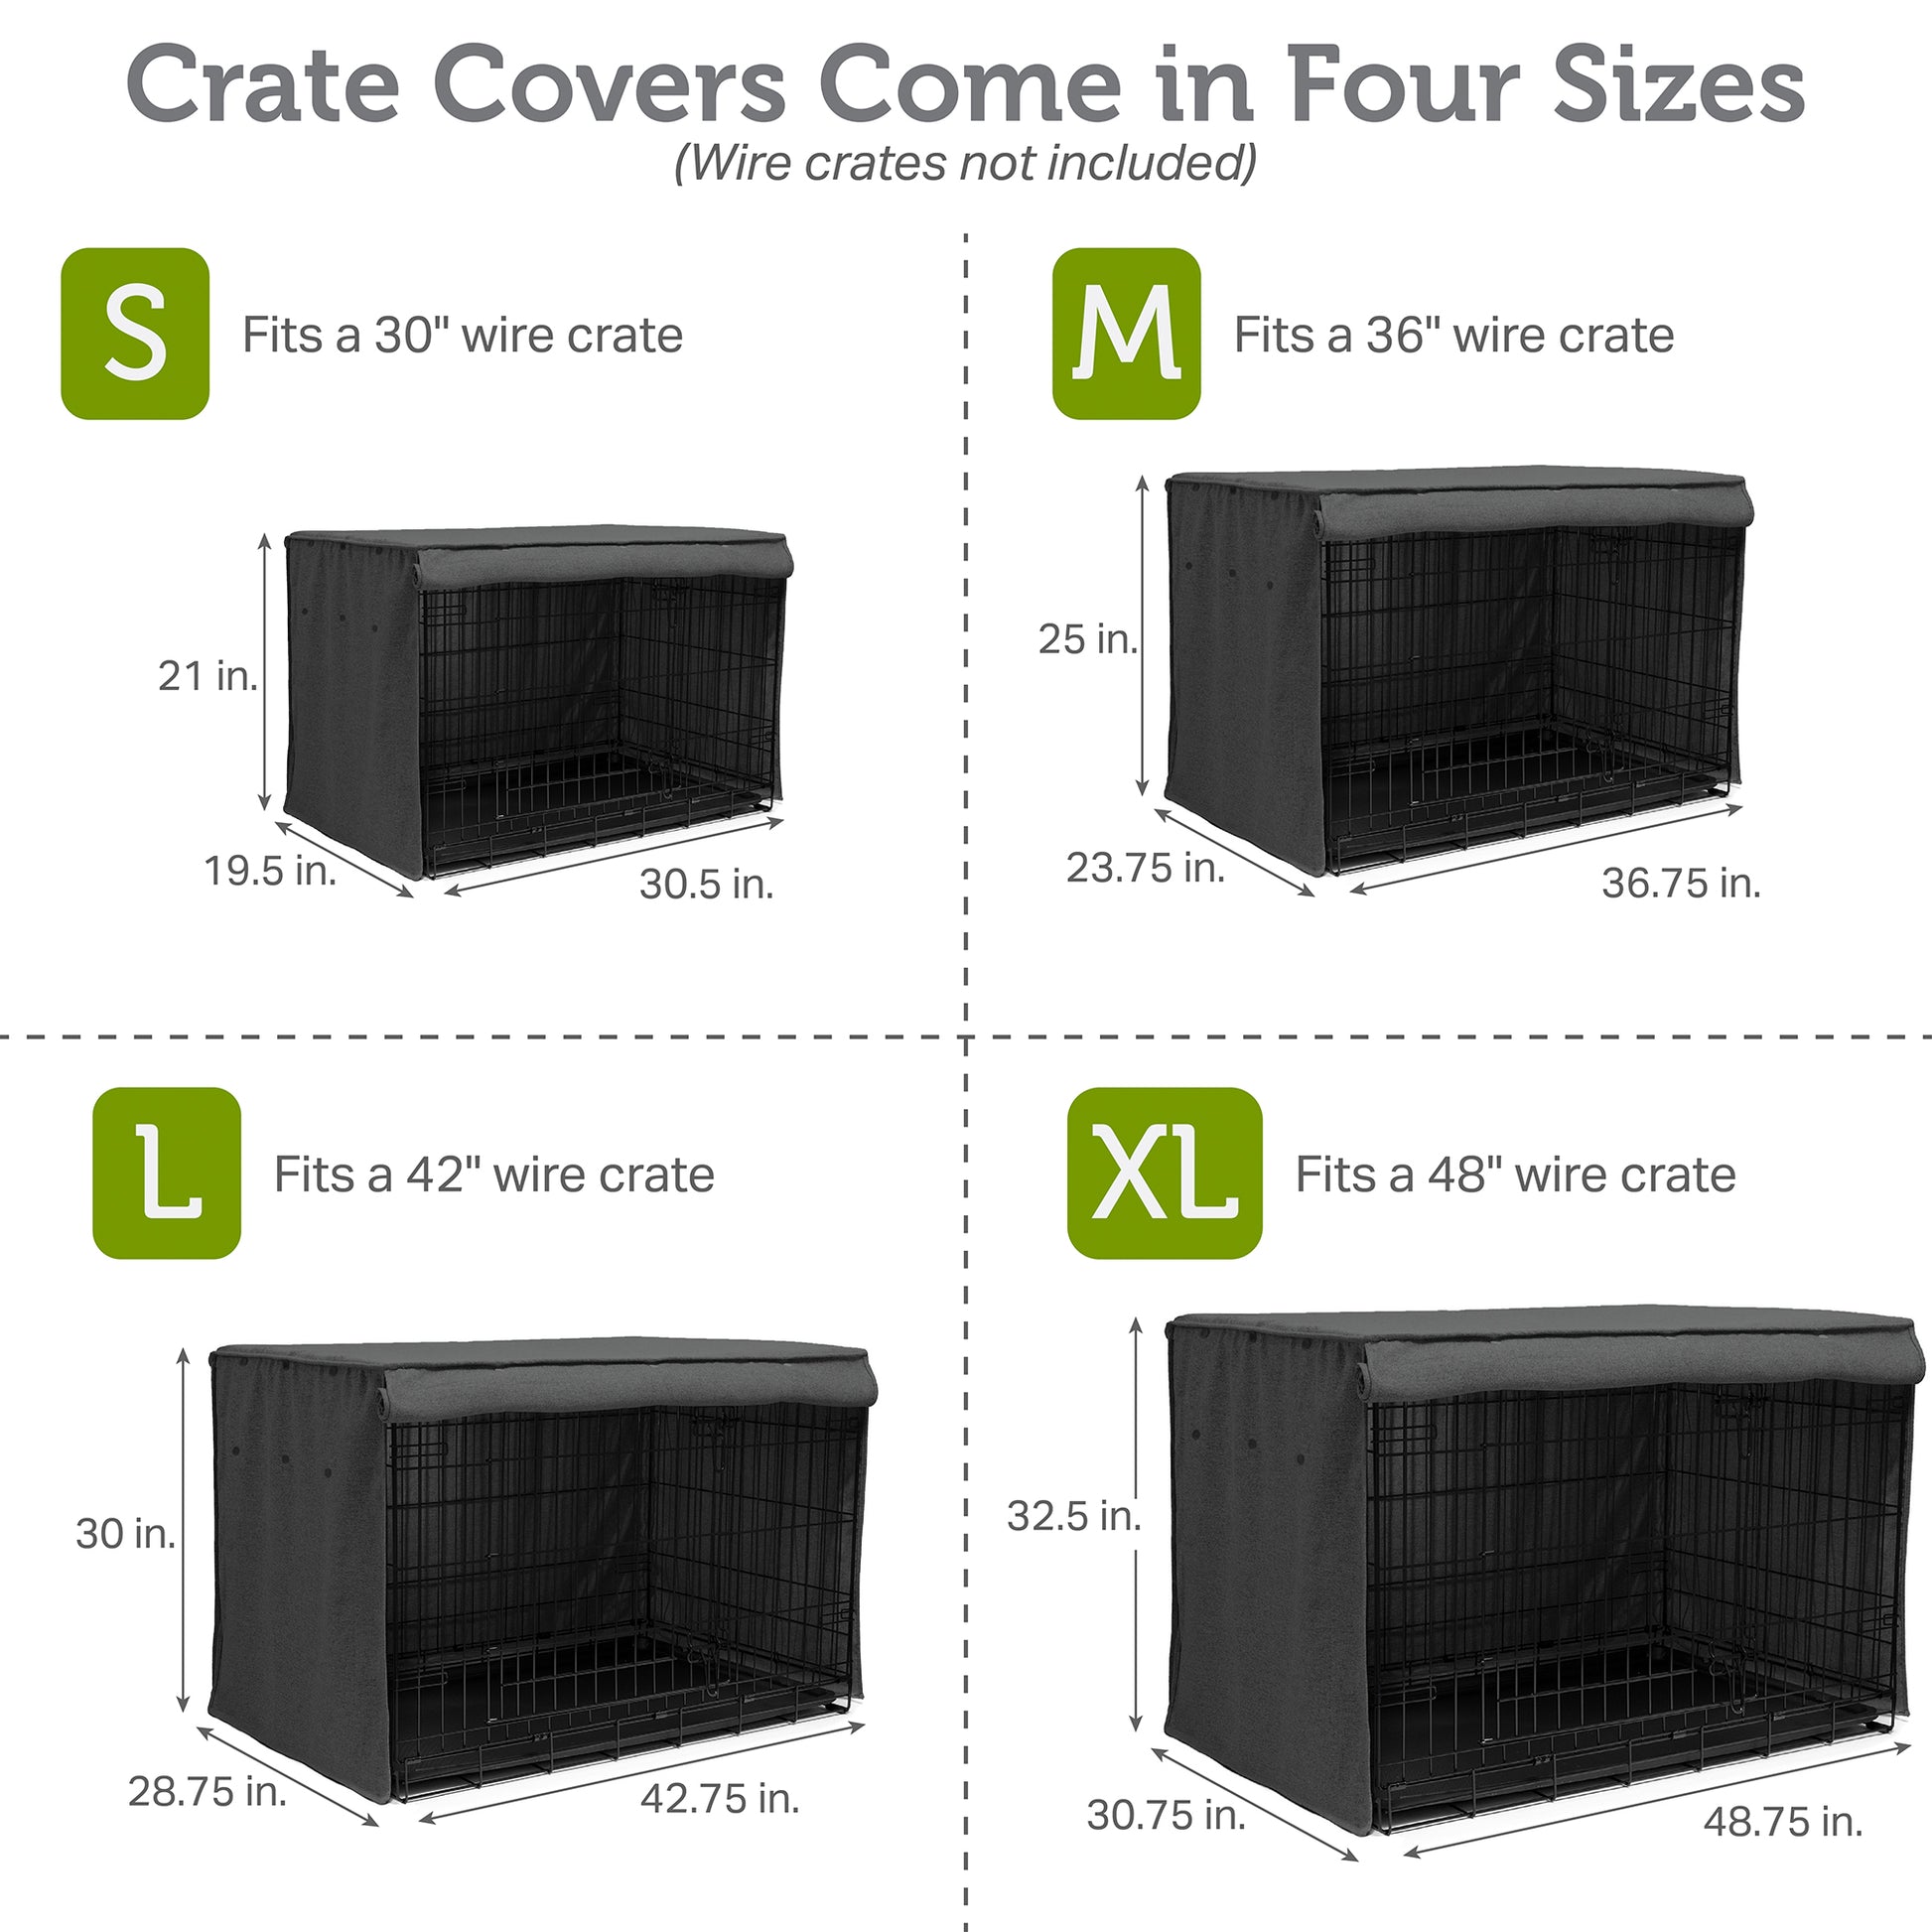 Dog Crate Cover for Dog Cage - Trucker